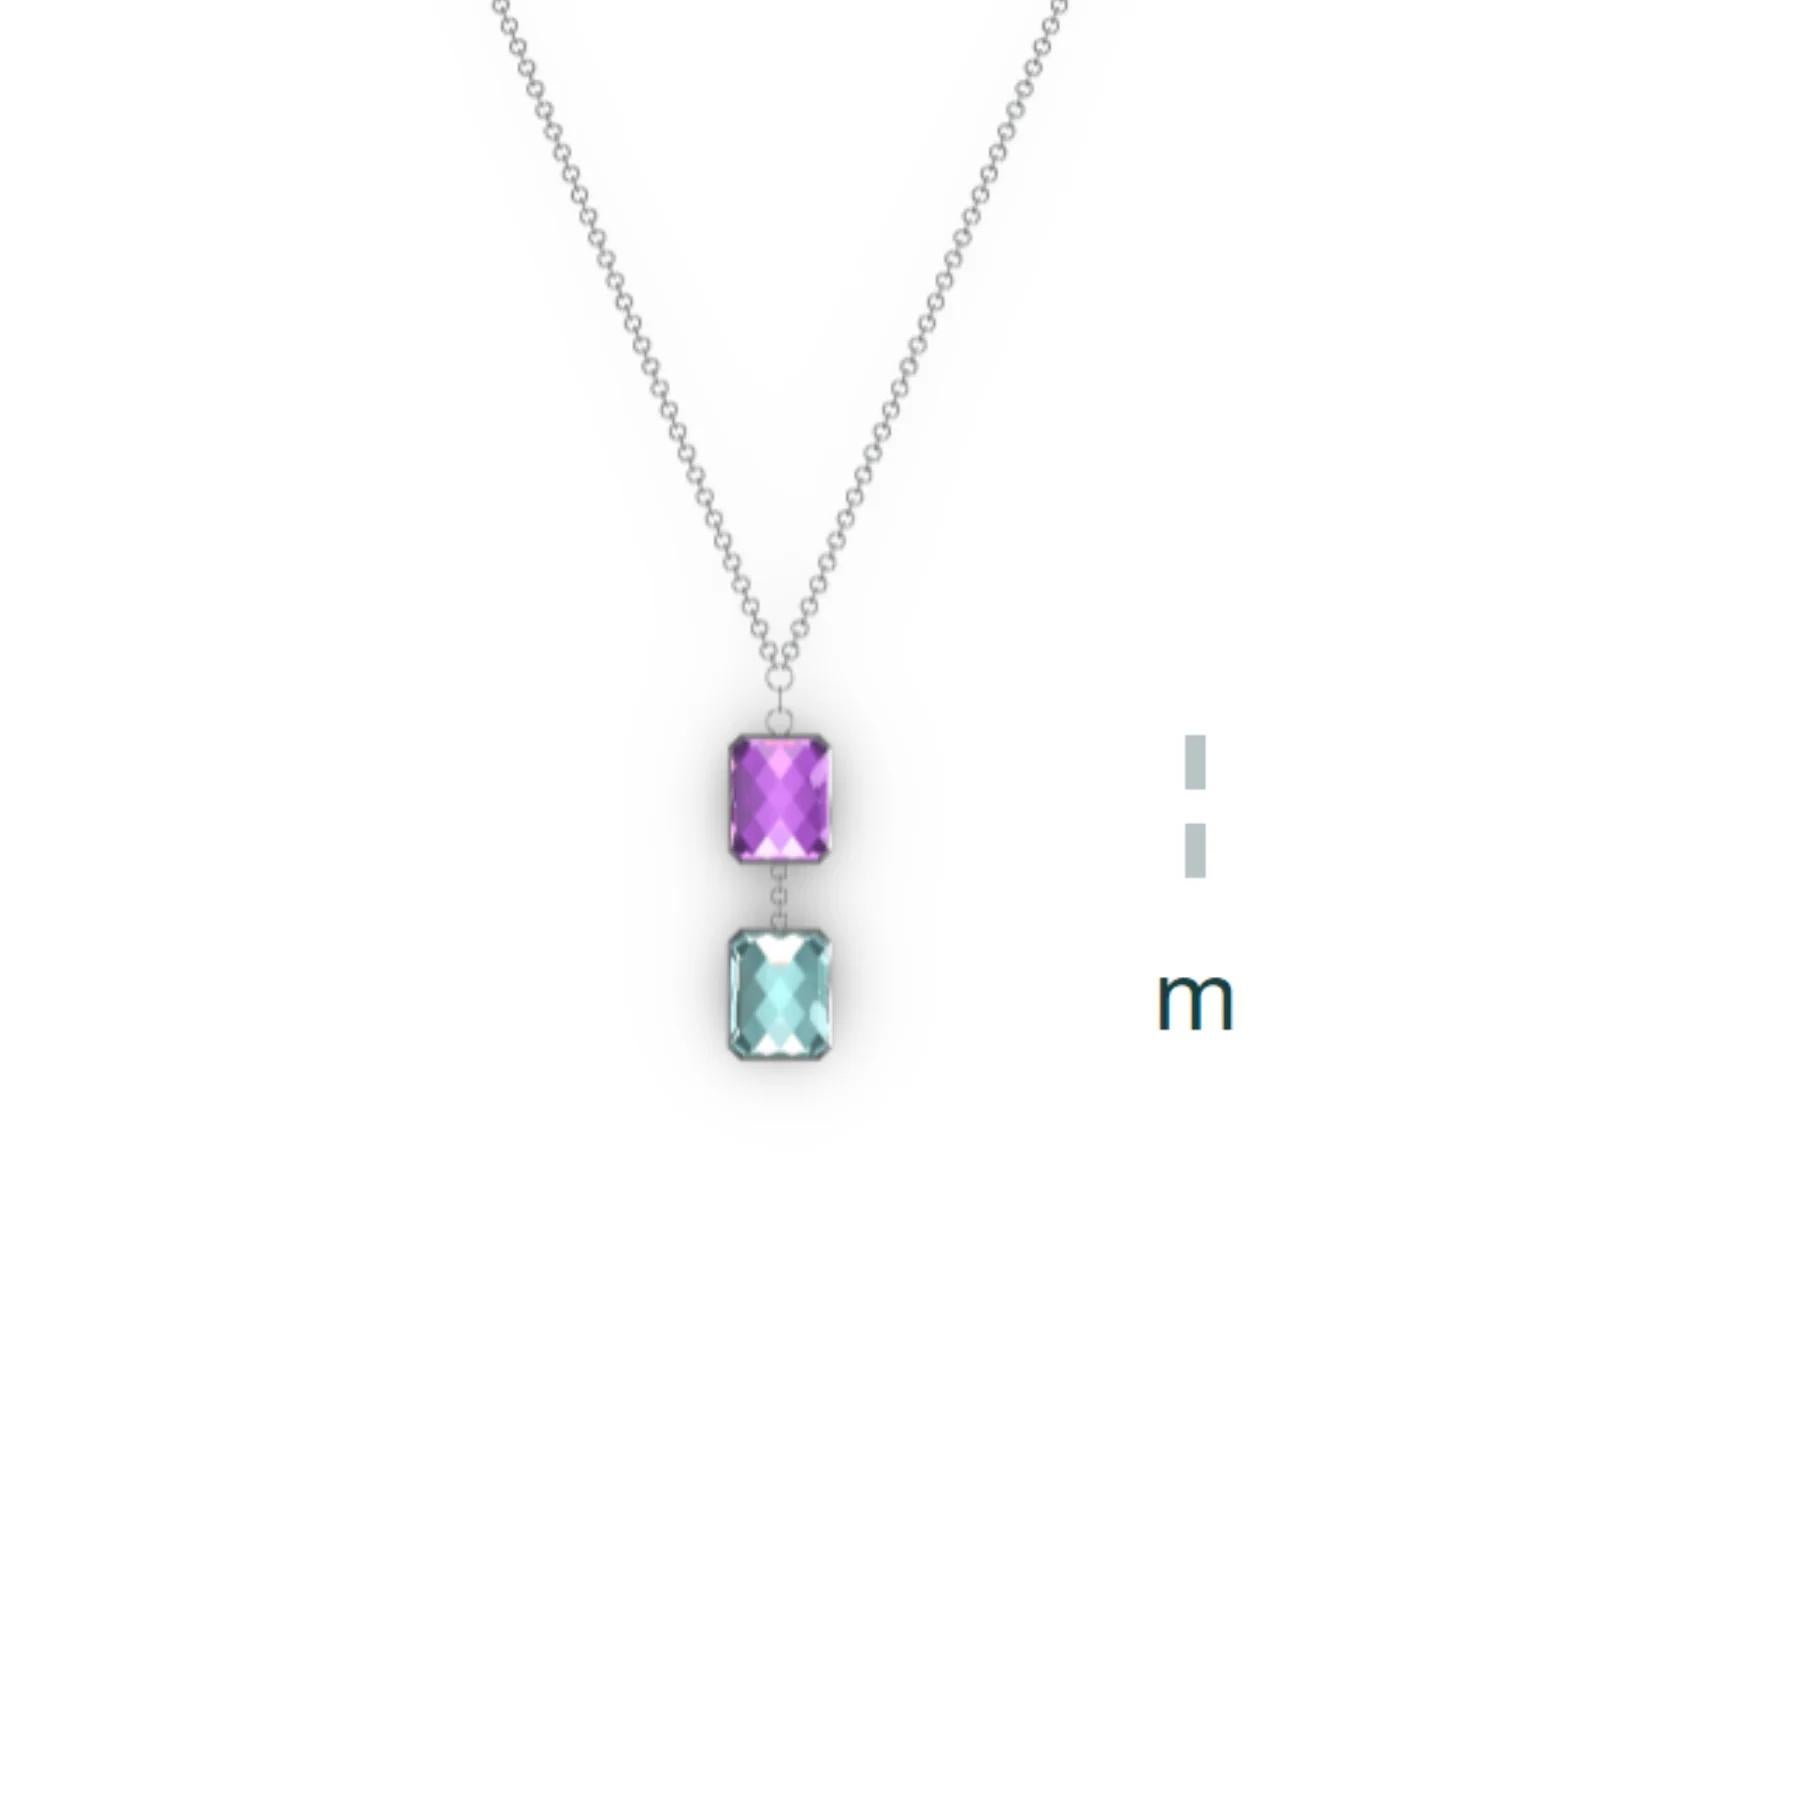 M is for Mom, Miraculous, May… Encode the letters of your name, your children's initials, your lucky numbers, or a secret message of inspiration.

Details of this piece:
Handcrafted
Recycled 925 sterling silver

About Us
In the intricate dance of